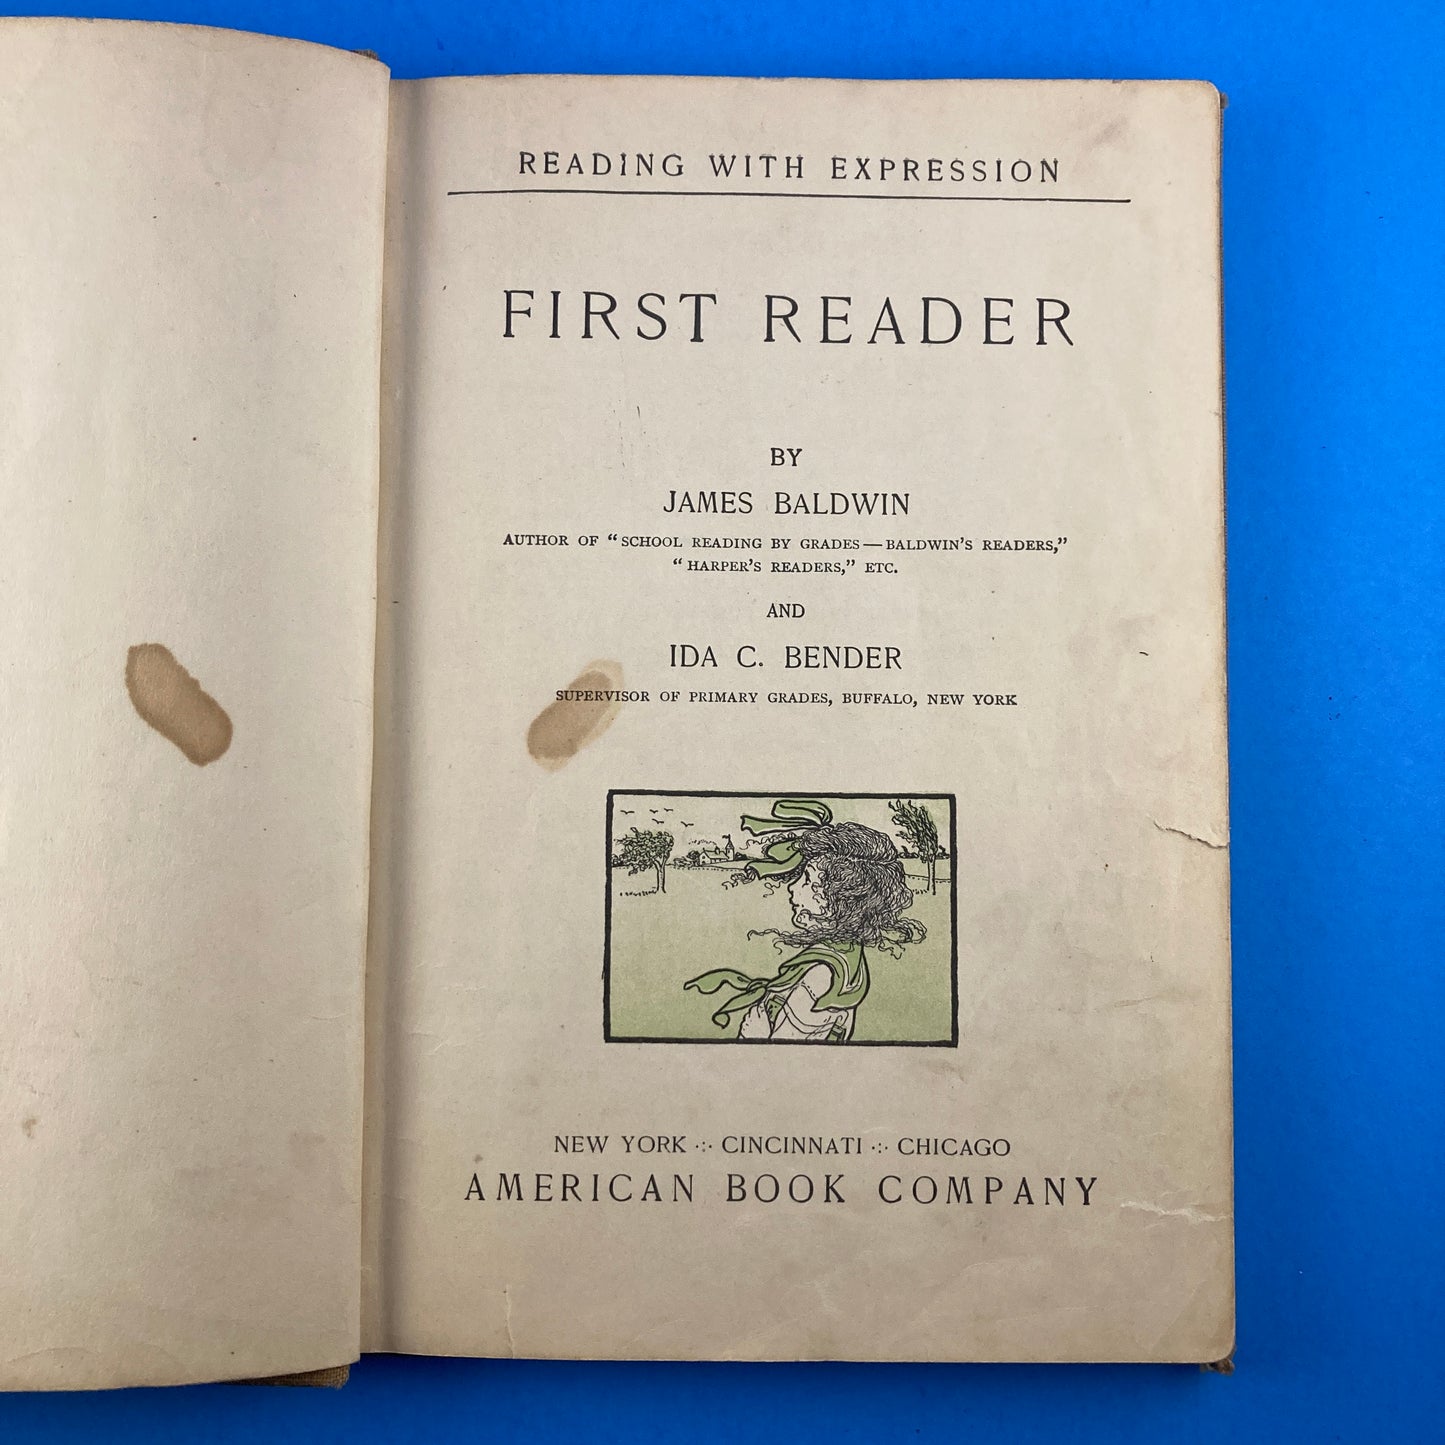 Reading with Expression: First Reader